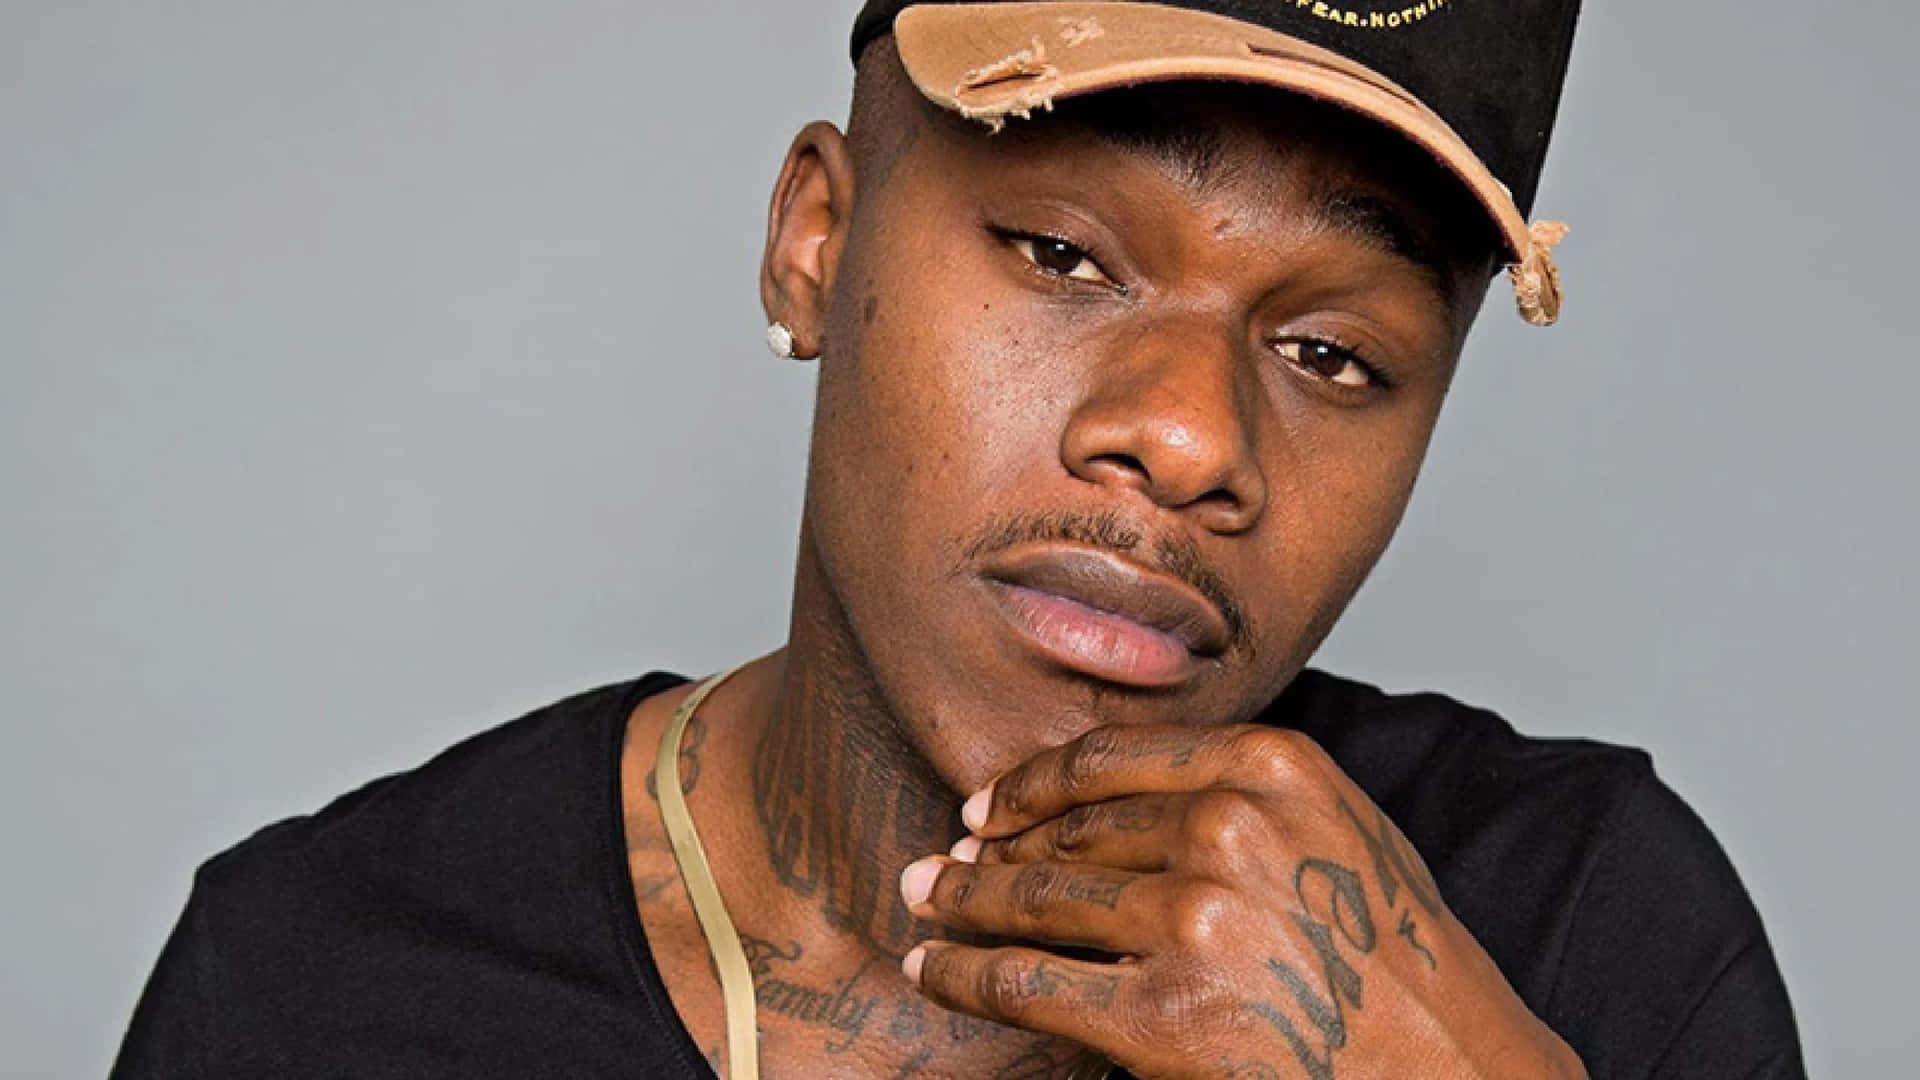 DaBaby at a Photoshoot